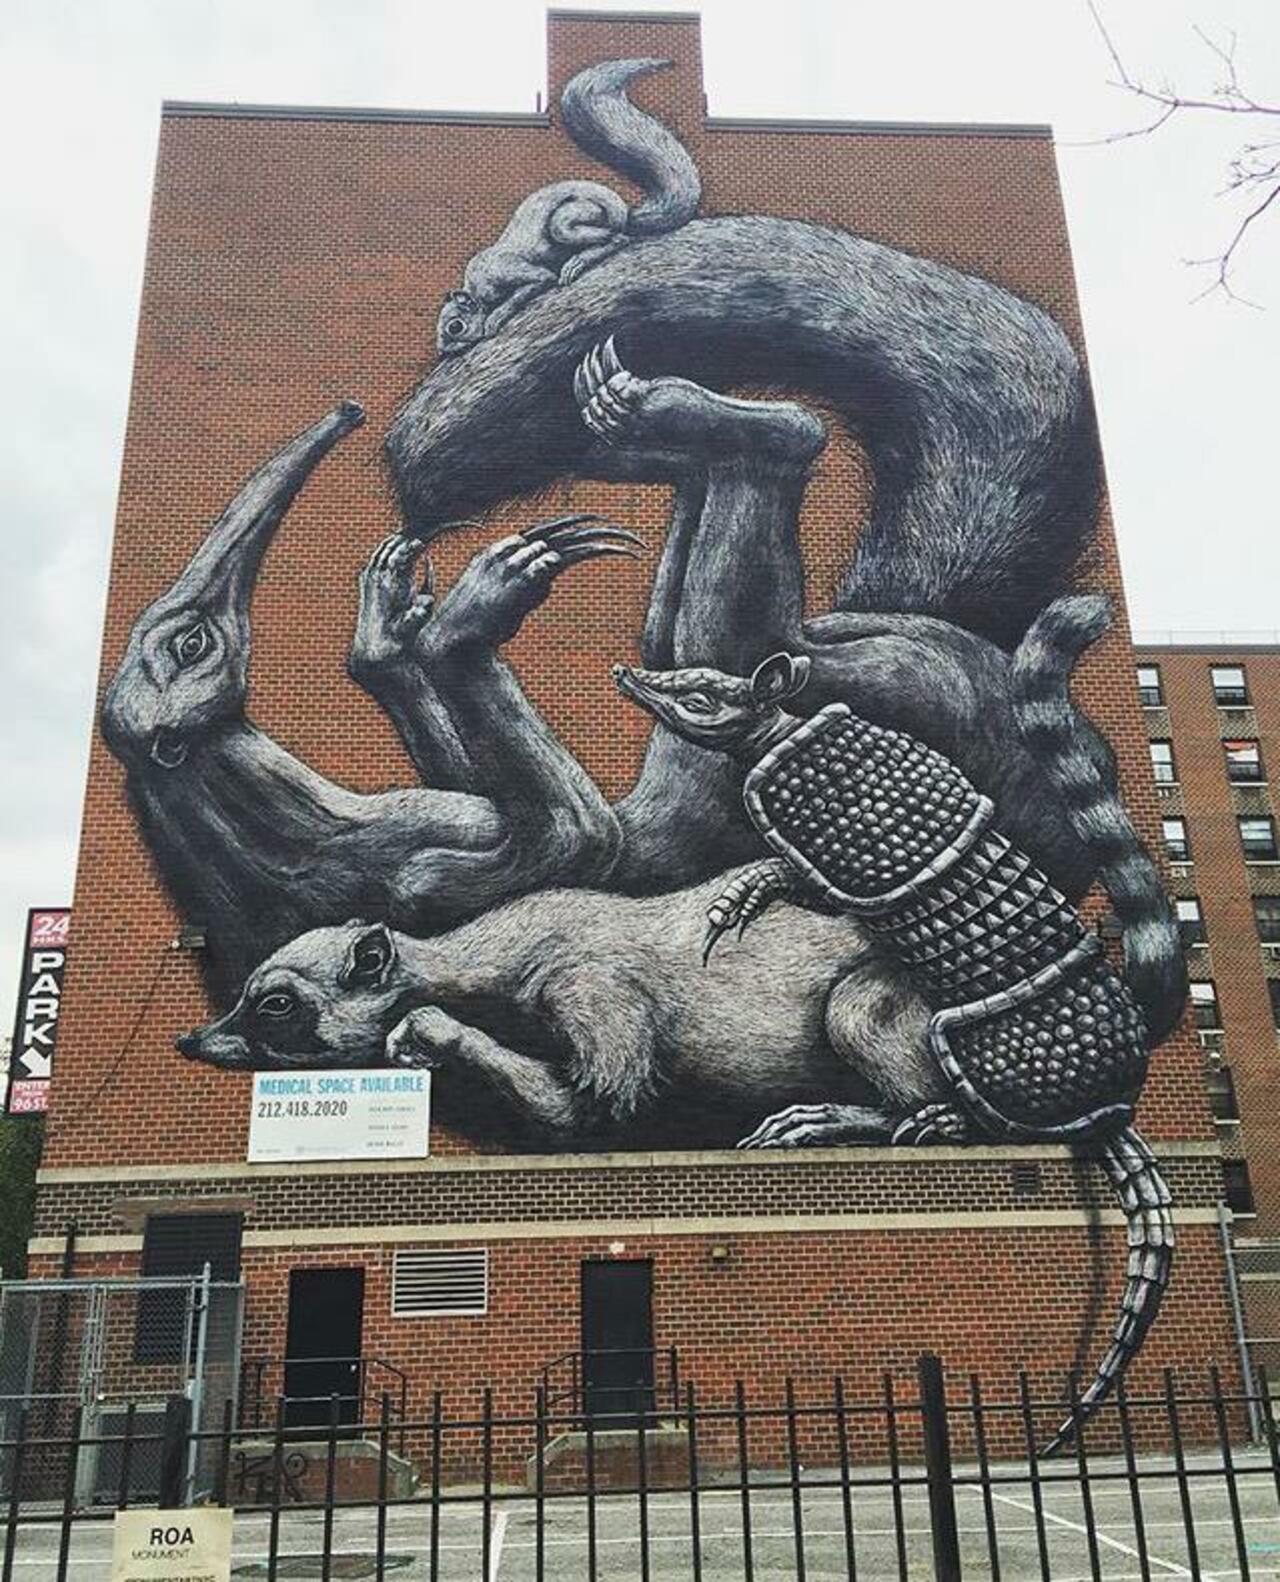 The completed new large scale Street Art wall by ROA in NYC

#art #graffiti #mural #streetart http://t.co/rv14IgauIy